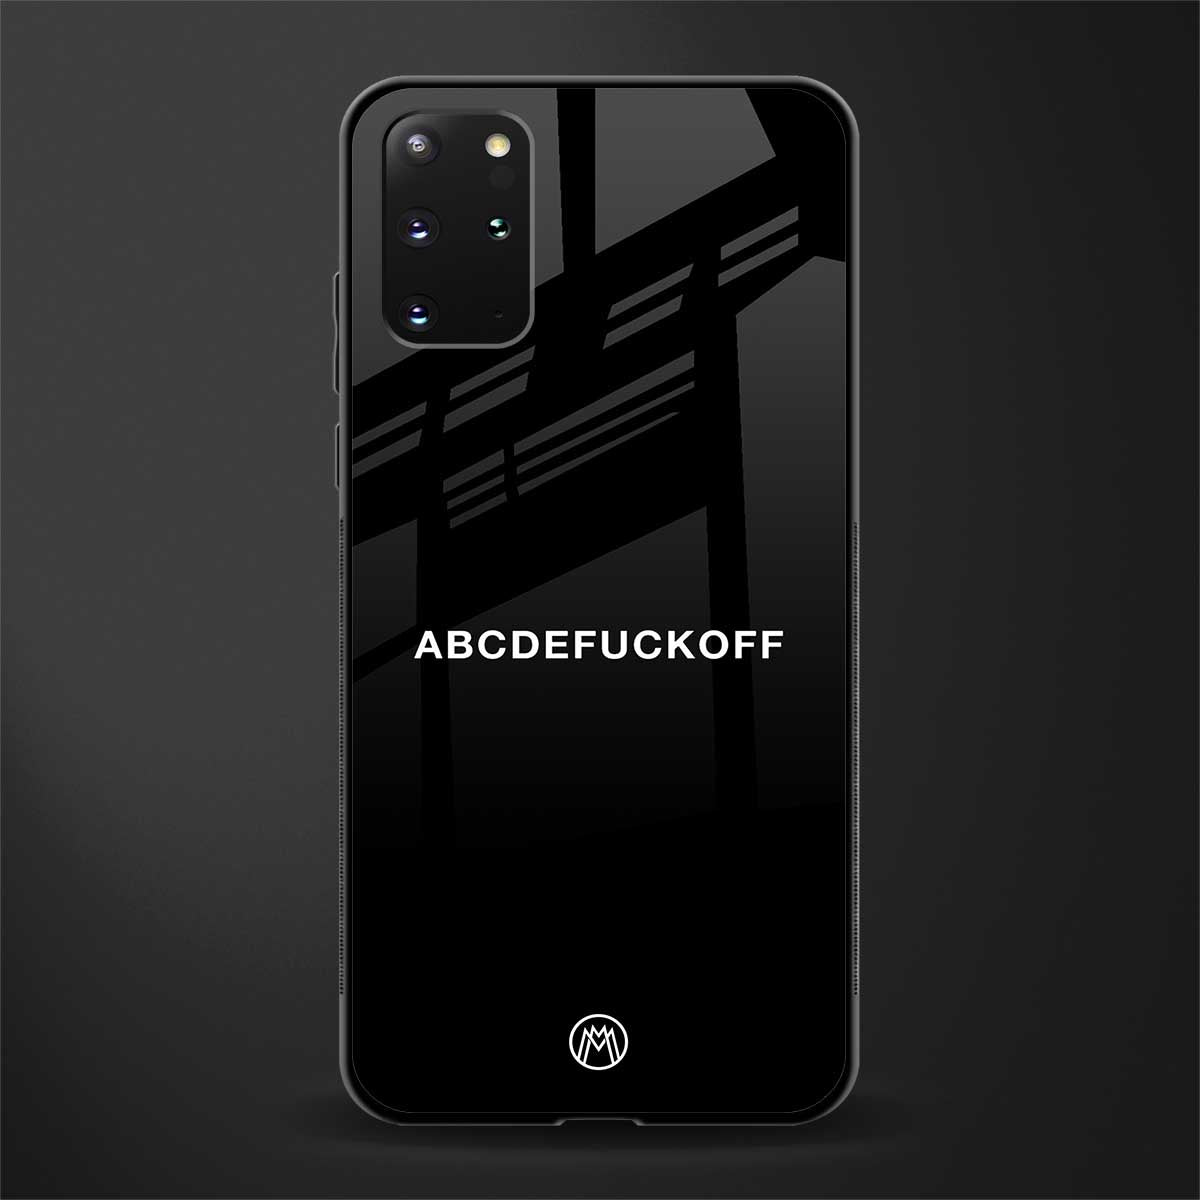 abcdefuckoff glass case for samsung galaxy s20 plus image